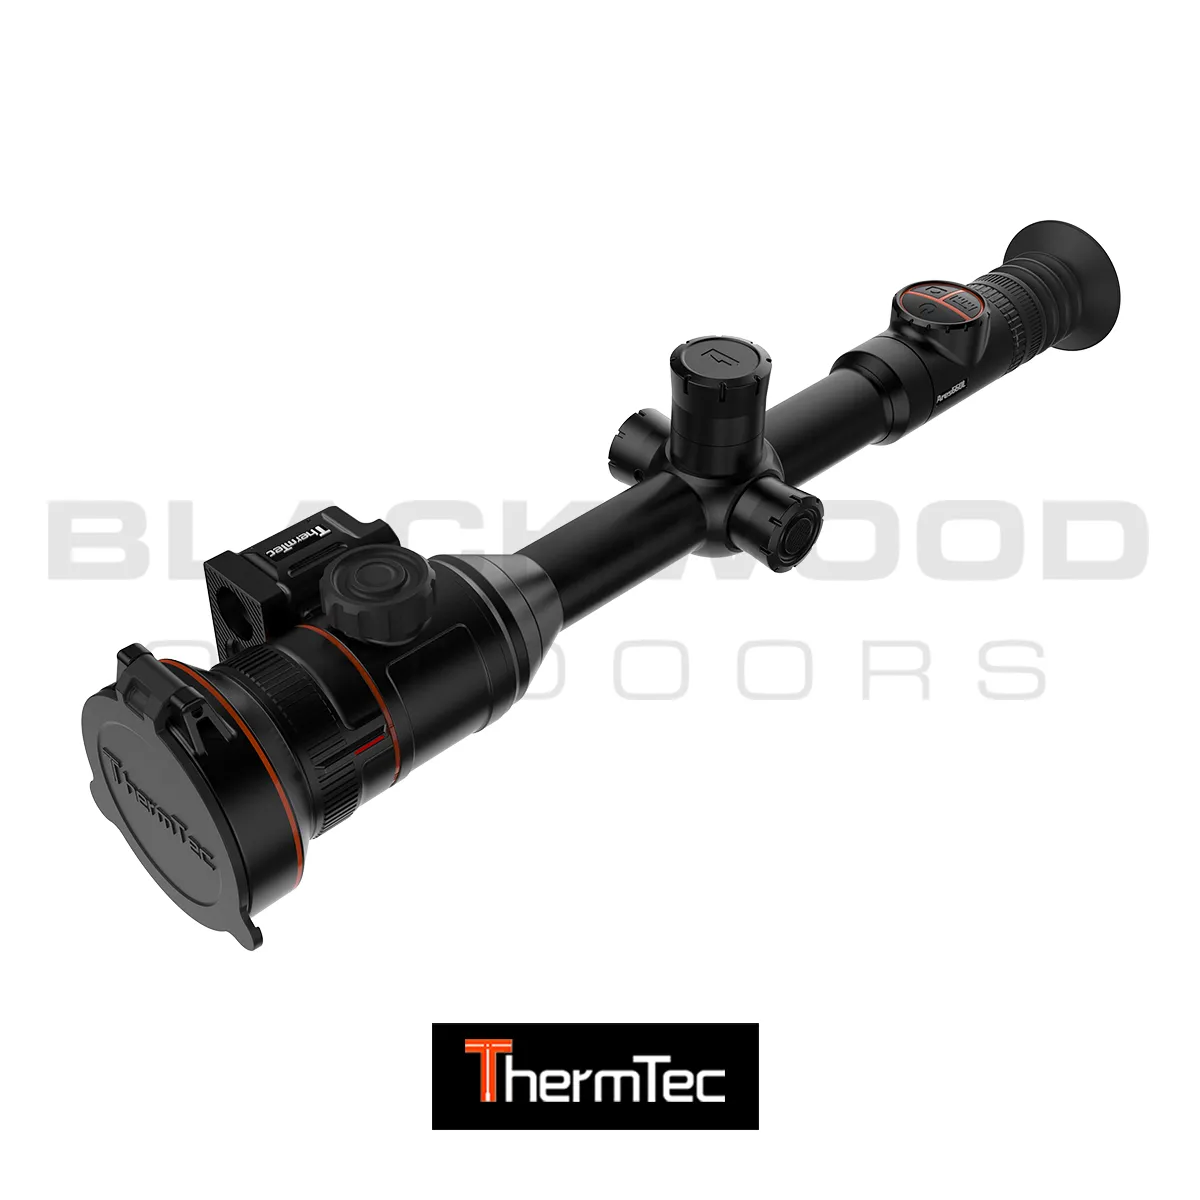 Thermtec Ares 660L LRF Thermal Scope Angle